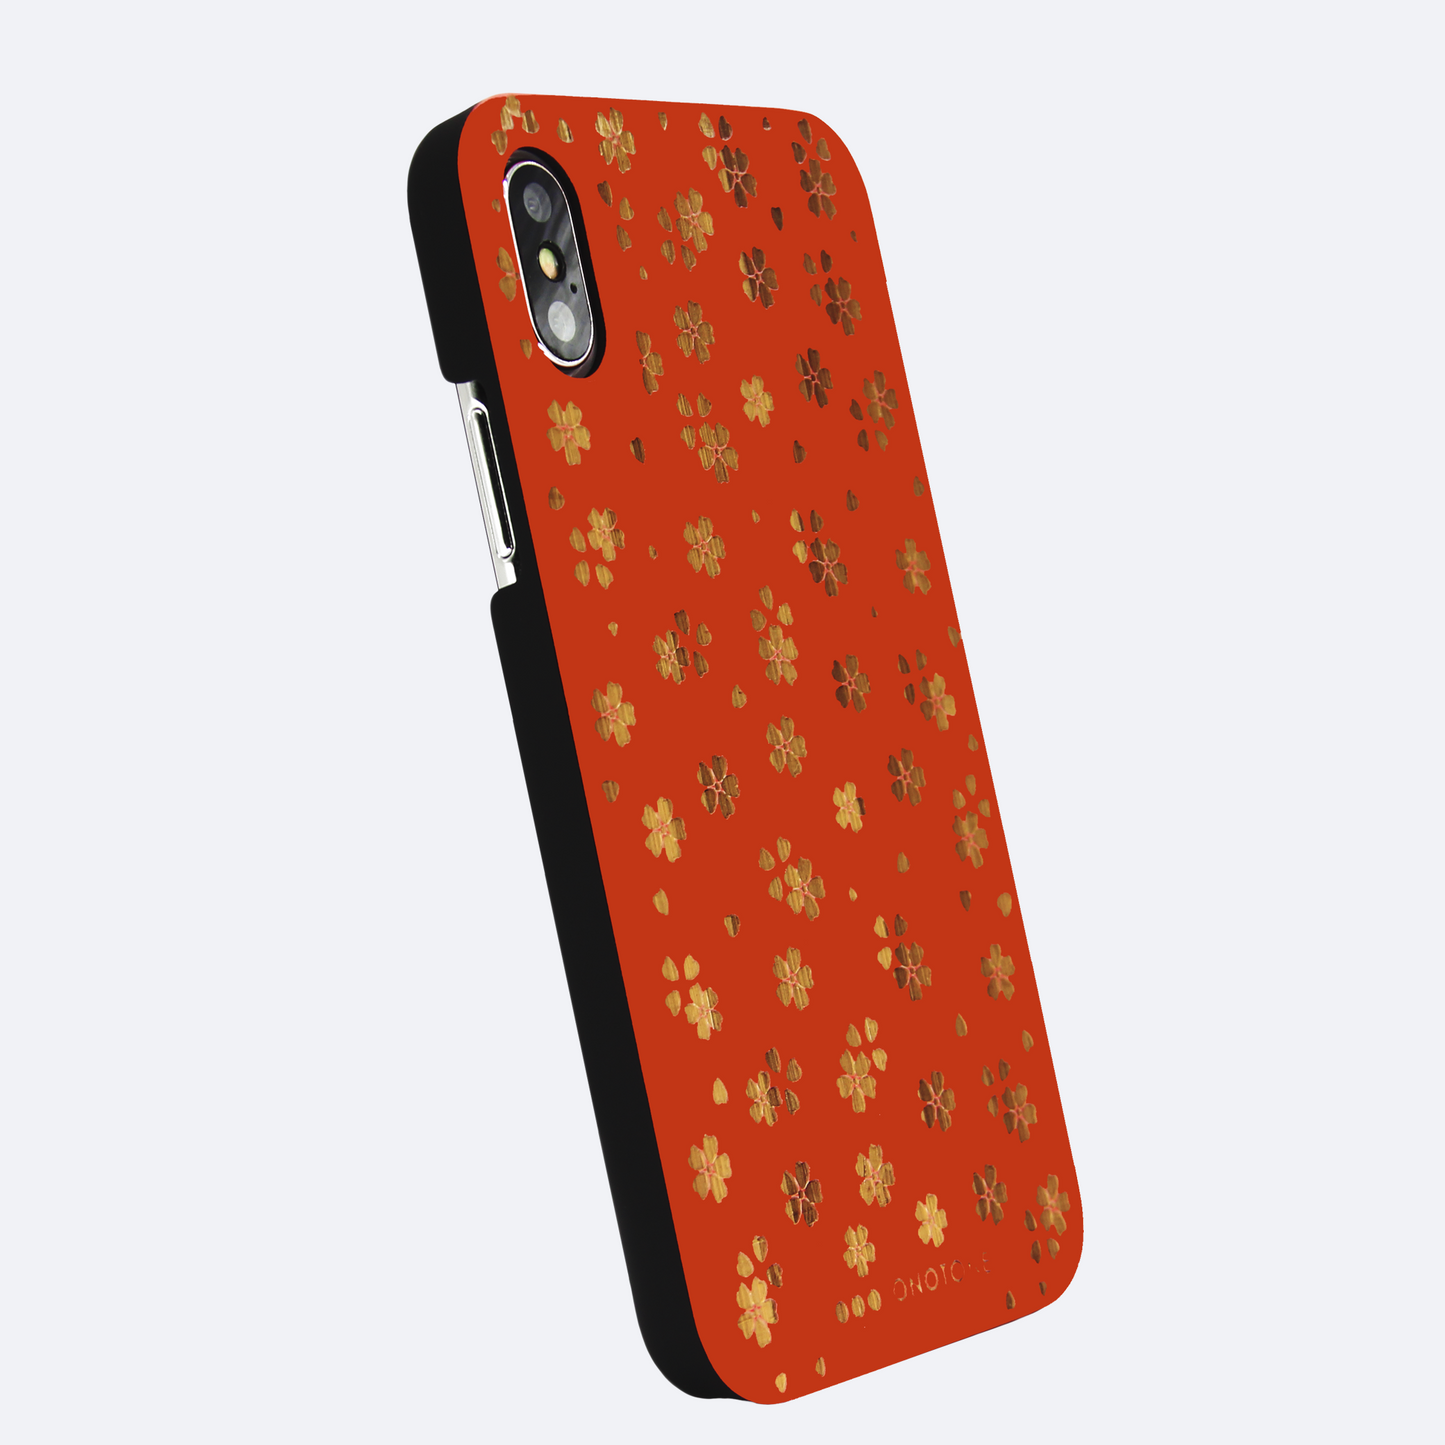 slower iPhone cases